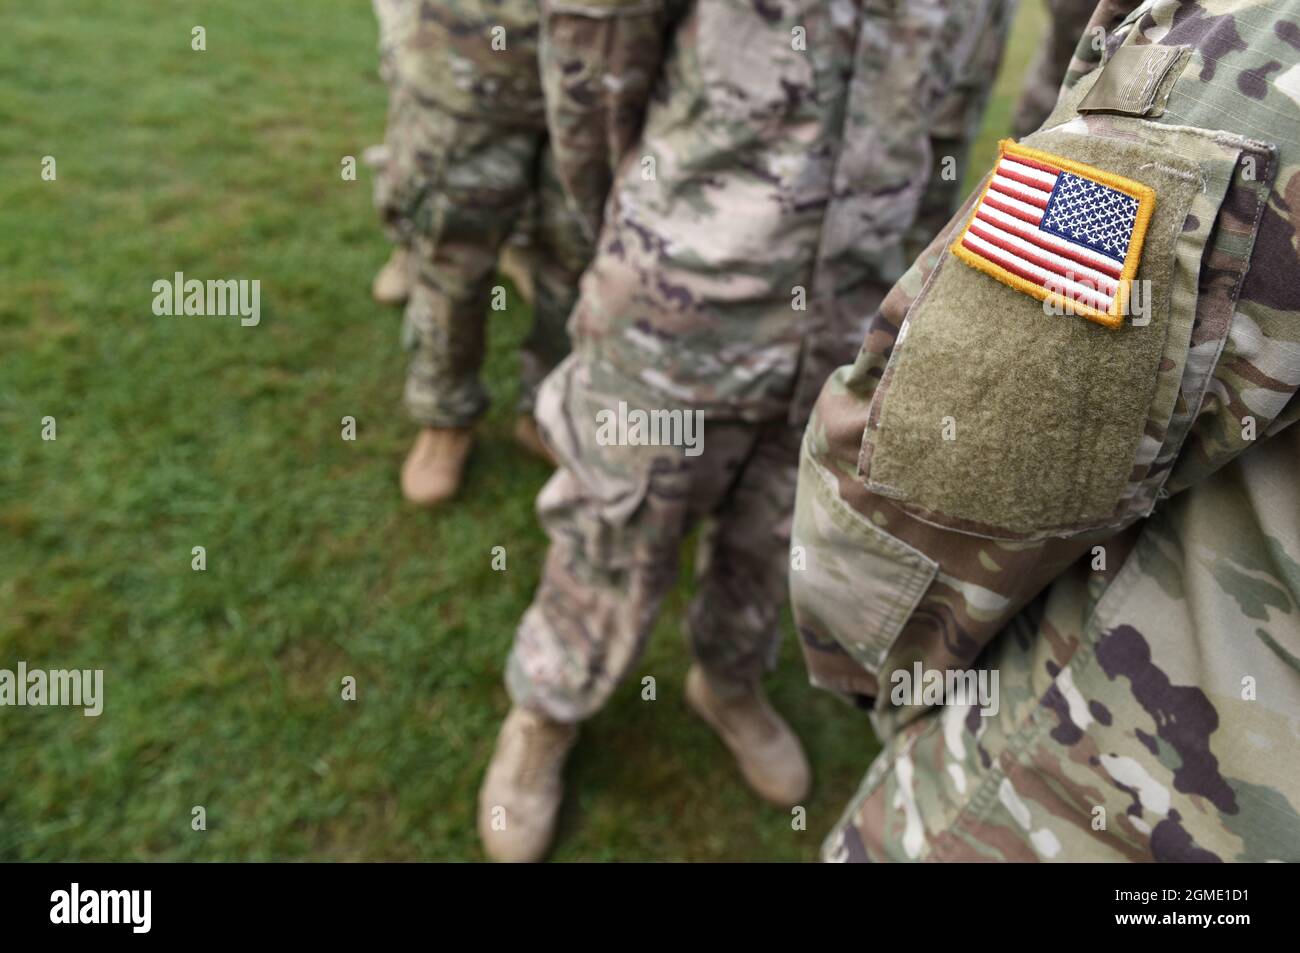 US soldiers. US army. USA patch flag on the US military uniform. Veterans Day. Memorial Day. Stock Photo